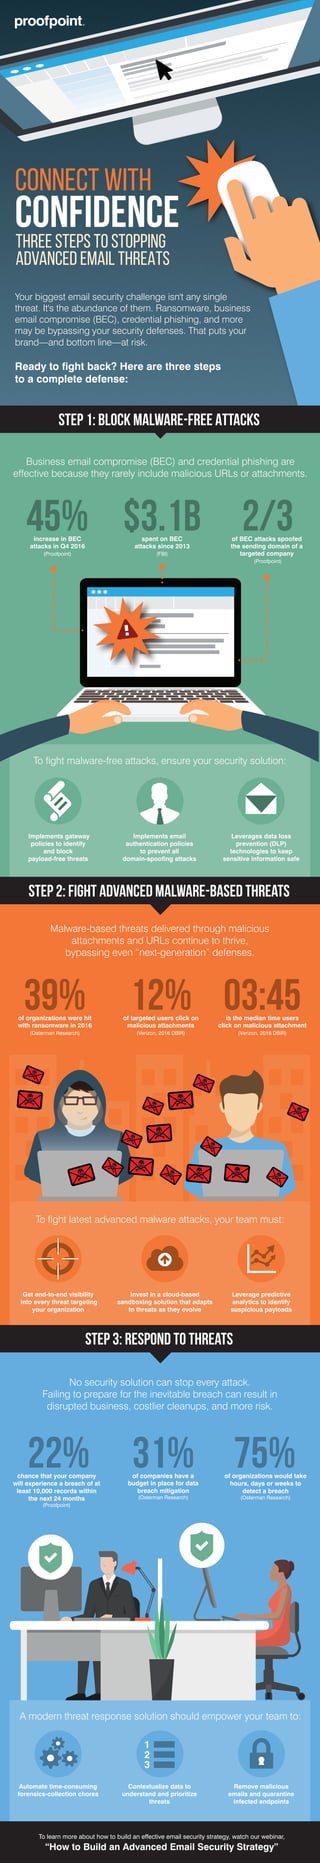 To learn more about how to build an effective email security strategy, watch our webinar,
“How to Build an Advanced Email Security Strategy”
Step 2: Fight Advanced Malware-Based Threats
Step 3: Respond to Threats
Business email compromise (BEC) and credential phishing are
effective because they rarely include malicious URLs or attachments.
To fight malware-free attacks, ensure your security solution:
2/3of BEC attacks spoofed
the sending domain of a
targeted company
(Proofpoint)
Implements gateway
policies to identify
and block
payload-free threats
Implements email
authentication policies
to prevent all
domain-spoofing attacks
Leverages data loss
prevention (DLP)
technologies to keep
sensitive information safe
Malware-based threats delivered through malicious
attachments and URLs continue to thrive,
bypassing even “next-generation” defenses.
No security solution can stop every attack.
Failing to prepare for the inevitable breach can result in
disrupted business, costlier cleanups, and more risk.
12%of targeted users click on
malicious attachments
(Verizon, 2016 DBIR)
03:45is the median time users
click on malicious attachment
(Verizon, 2016 DBIR)
To fight latest advanced malware attacks, your team must:
Get end-to-end visibility
into every threat targeting
your organization
Invest in a cloud-based
sandboxing solution that adapts
to threats as they evolve
Leverage predictive
analytics to identify
suspicious payloads
chance that your company
will experience a breach of at
least 10,000 records within
the next 24 months
(Proofpoint)
of companies have a
budget in place for data
breach mitigation
(Osterman Research)
of organizations would take
hours, days or weeks to
detect a breach
(Osterman Research)
31% 75%22%
A modern threat response solution should empower your team to:
Automate time-consuming
forensics-collection chores
Contextualize data to
understand and prioritize
threats
Remove malicious
emails and quarantine
infected endpoints
Connect WITH
CONFIDENCE
45%increase in BEC
attacks in Q4 2016
(Proofpoint)
39%of organizations were hit
with ransomware in 2016
(Osterman Research)
$3.1bspent on BEC
attacks since 2013
(FBI)
Your biggest email security challenge isn't any single
threat. It's the abundance of them. Ransomware, business
email compromise (BEC), credential phishing, and more
may be bypassing your security defenses. That puts your
brand—and bottom line—at risk.
Ready to fight back? Here are three steps
to a complete defense:
Step 1: Block Malware-Free Attacks
THREE STEPS TO STOPPING
ADVANCED EMAIL THREATS
 